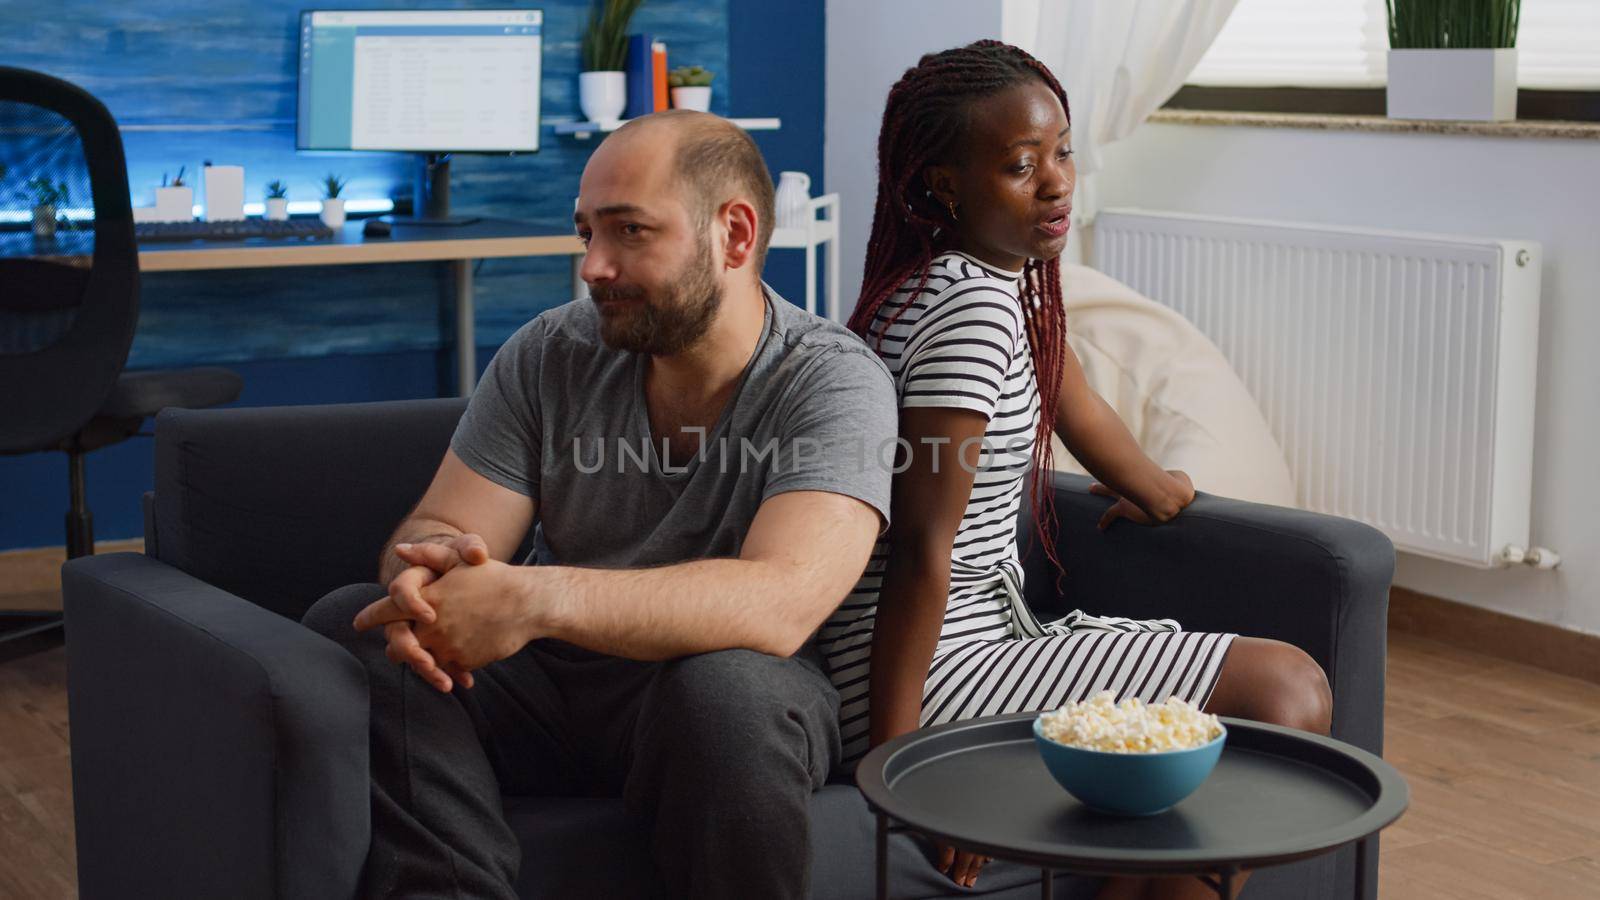 Married interracial people having argument at home by DCStudio